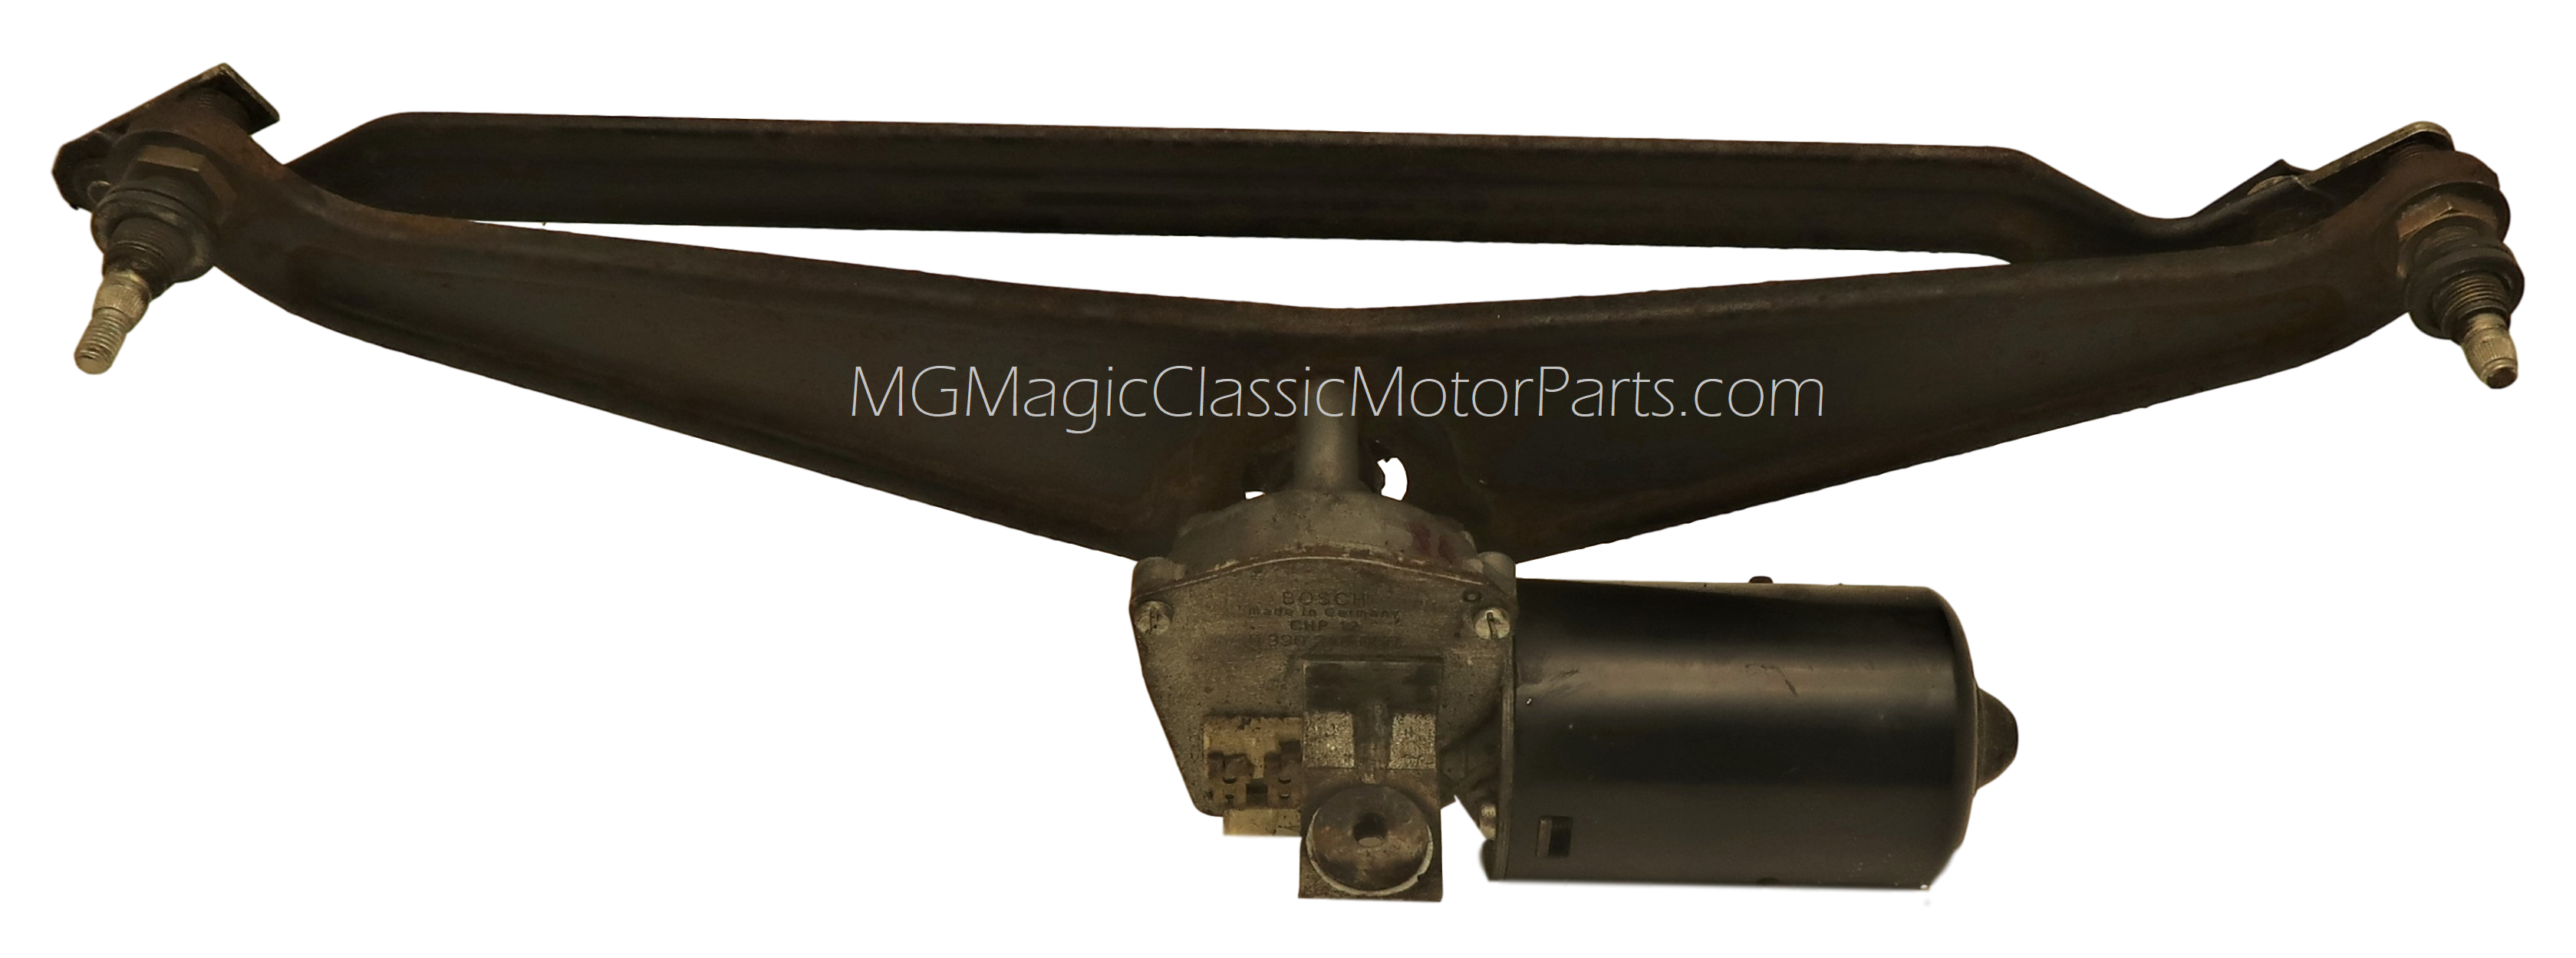 2019-05-22-wiper-motor-and-assembly2-clipped-rev-12.png